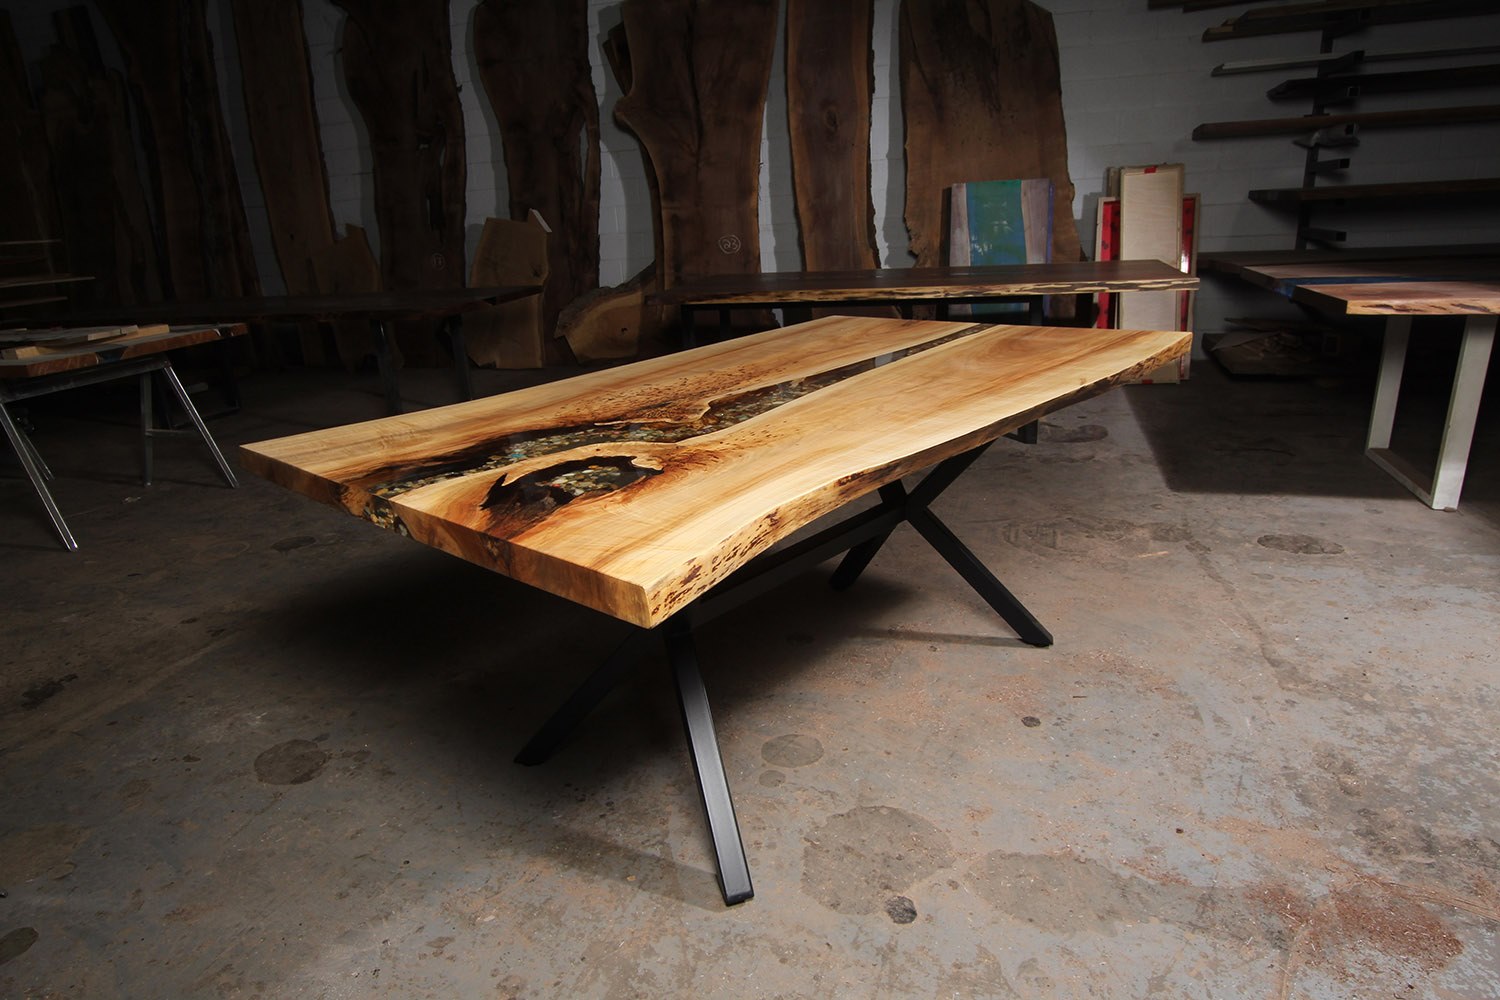 Maple Kitchen River Table with K shaped Legs